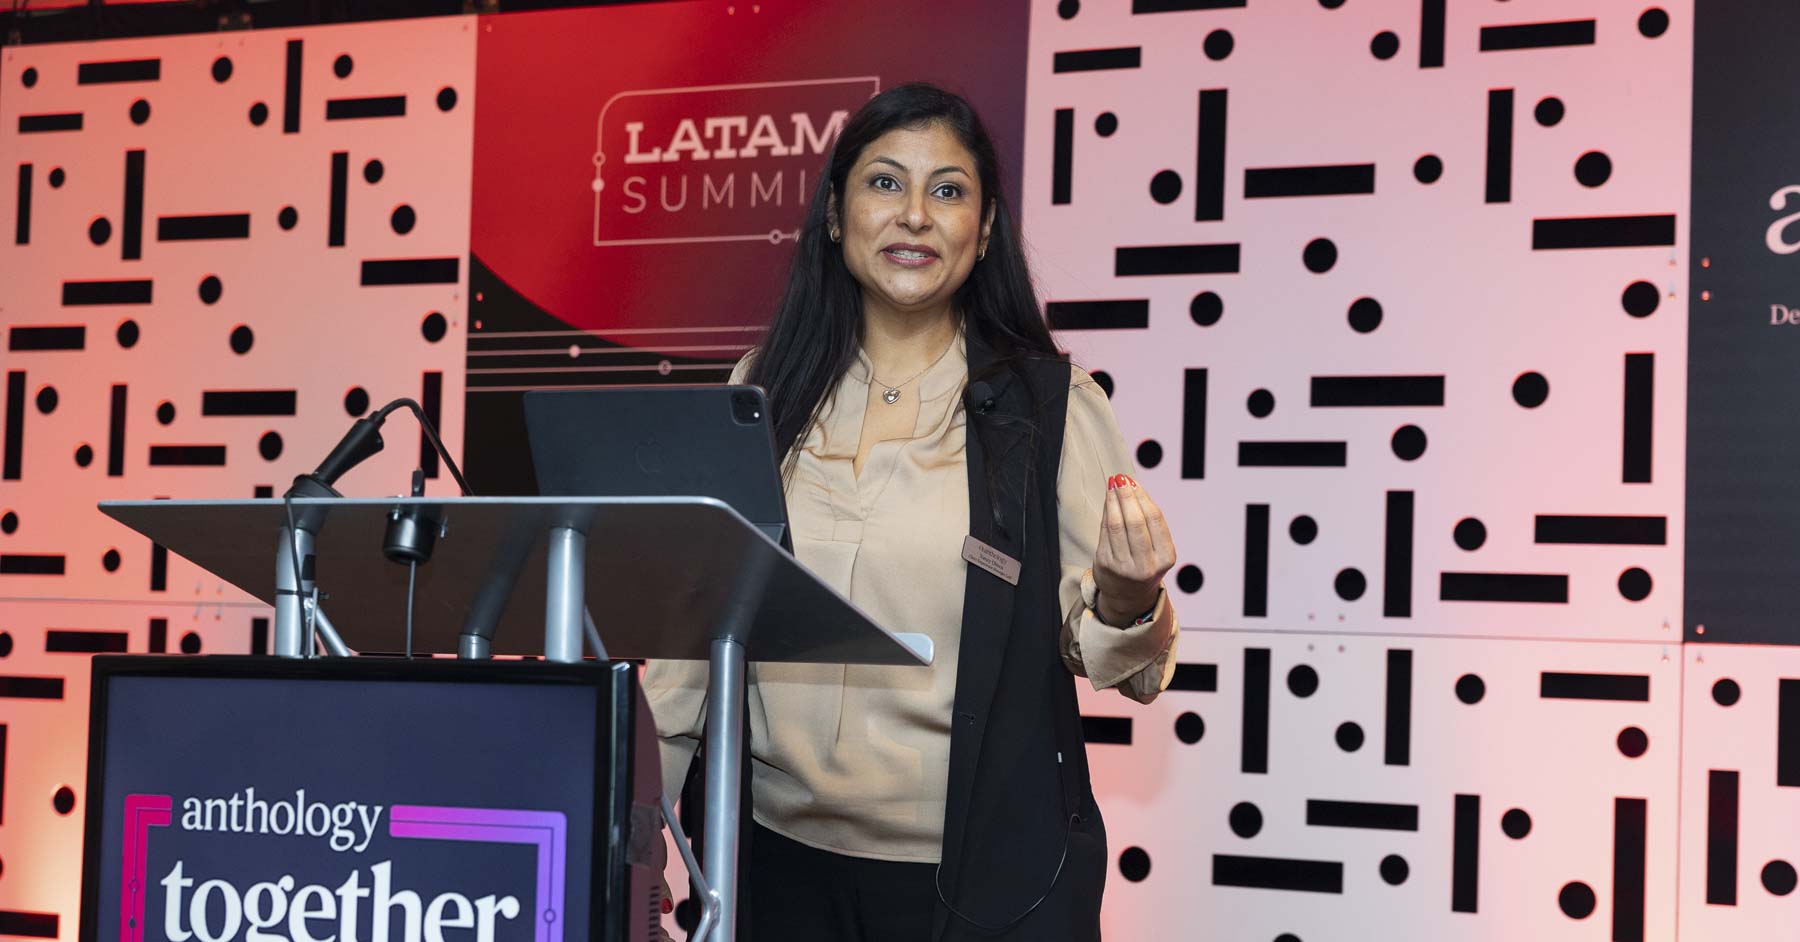 A woman giving a presetation at the LATAM Summit